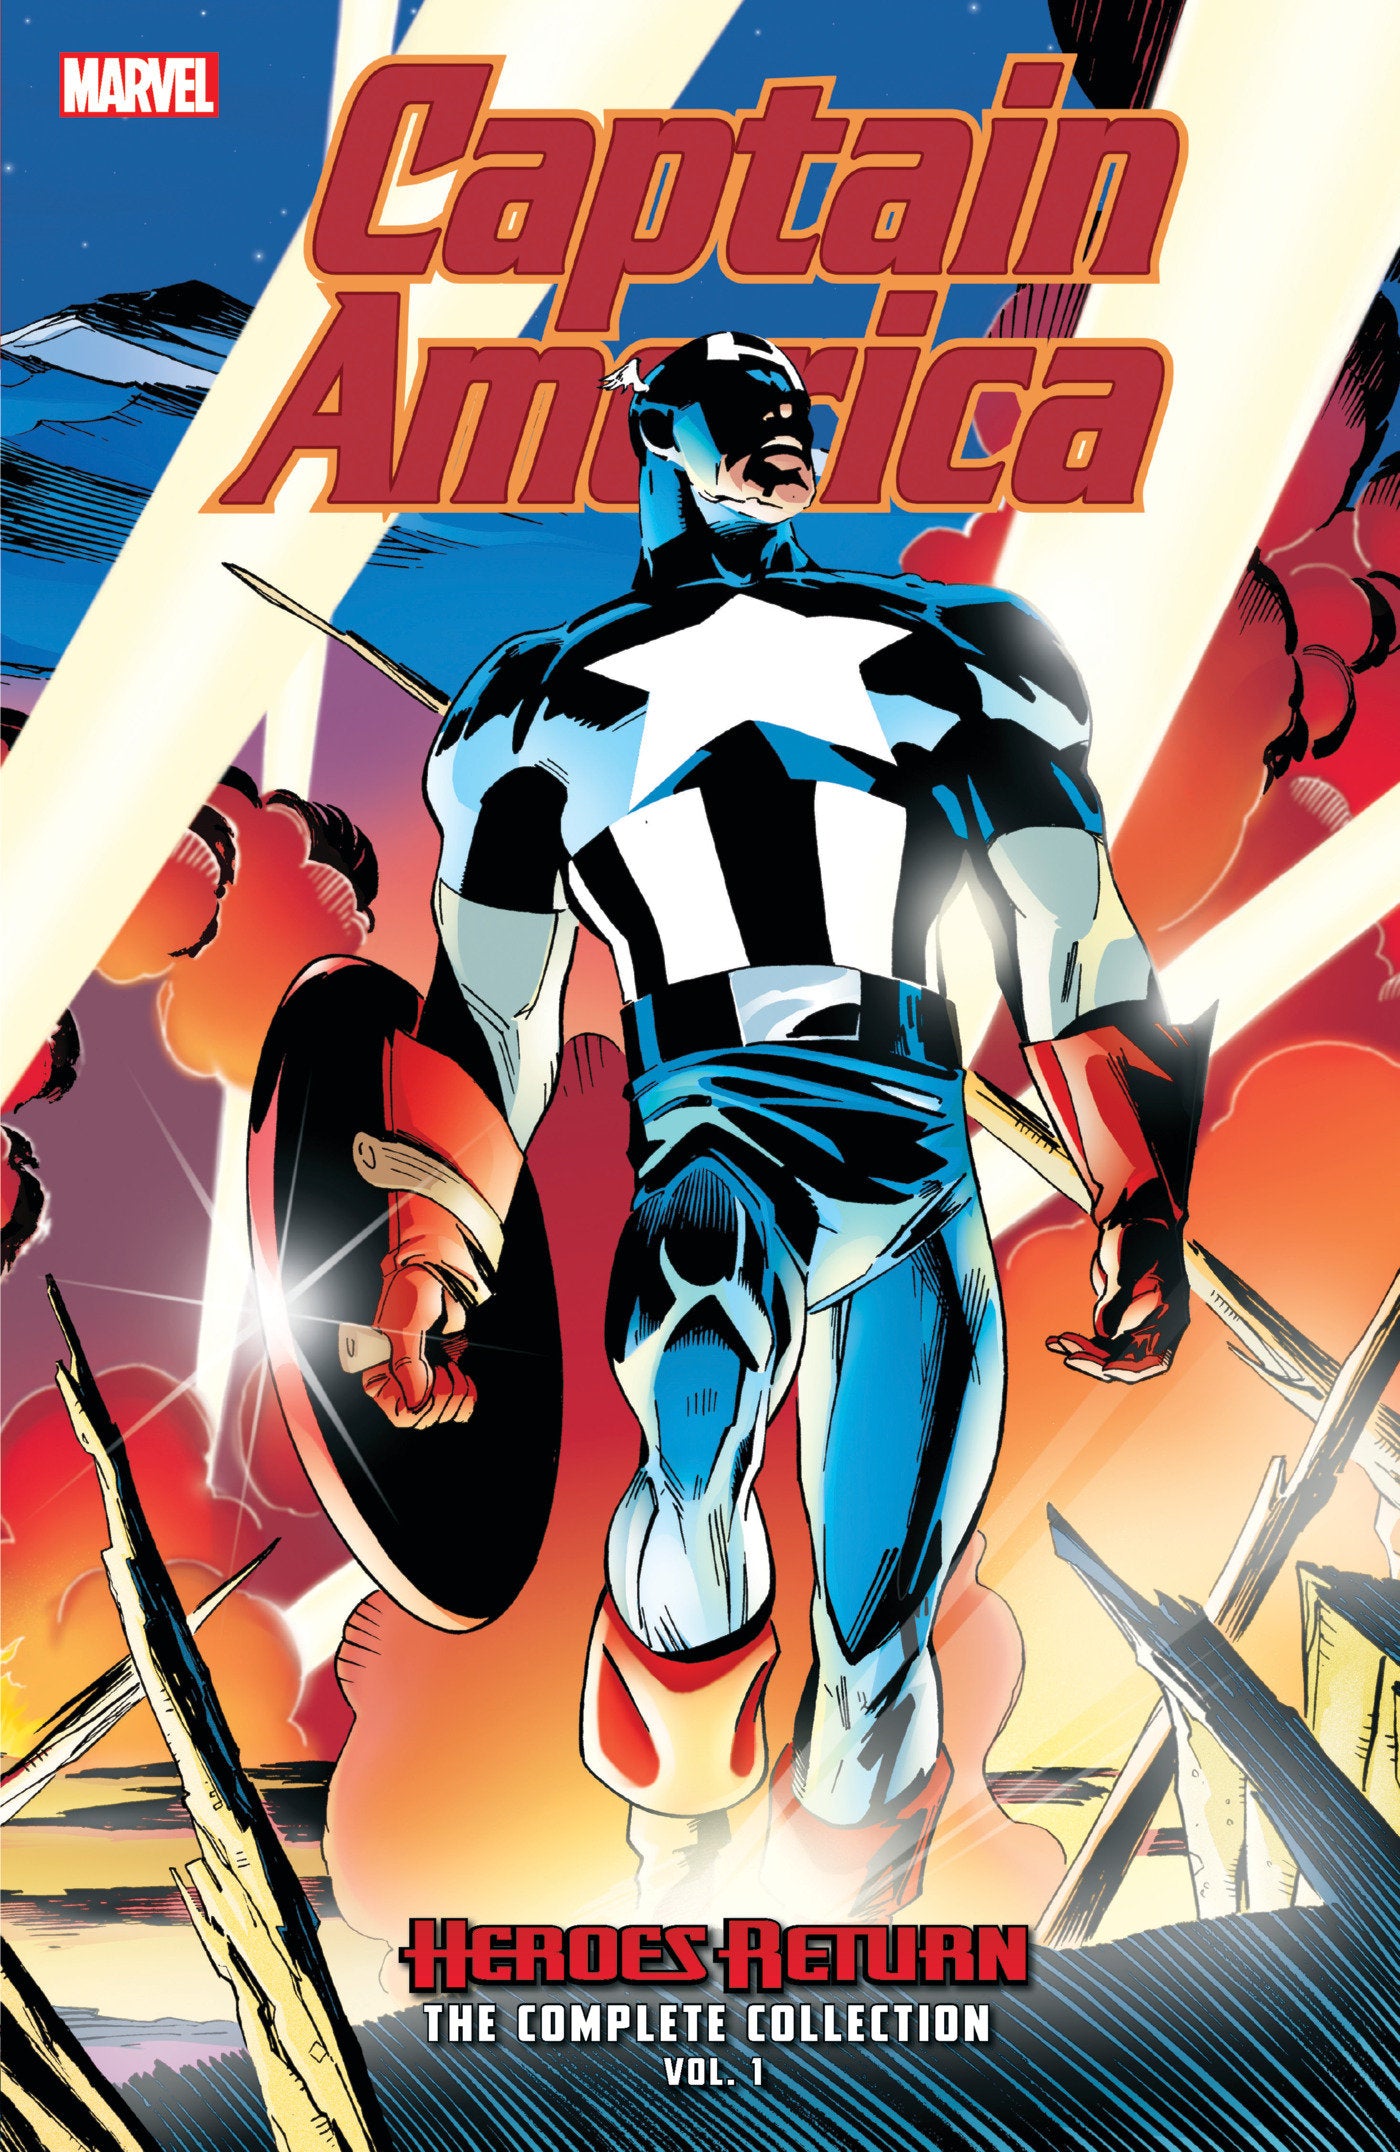 CAPTAIN AMERICA: HEROES RETURN - THE COMPLETE COLLECTION VOL. 1 TRADE PAPERBACK